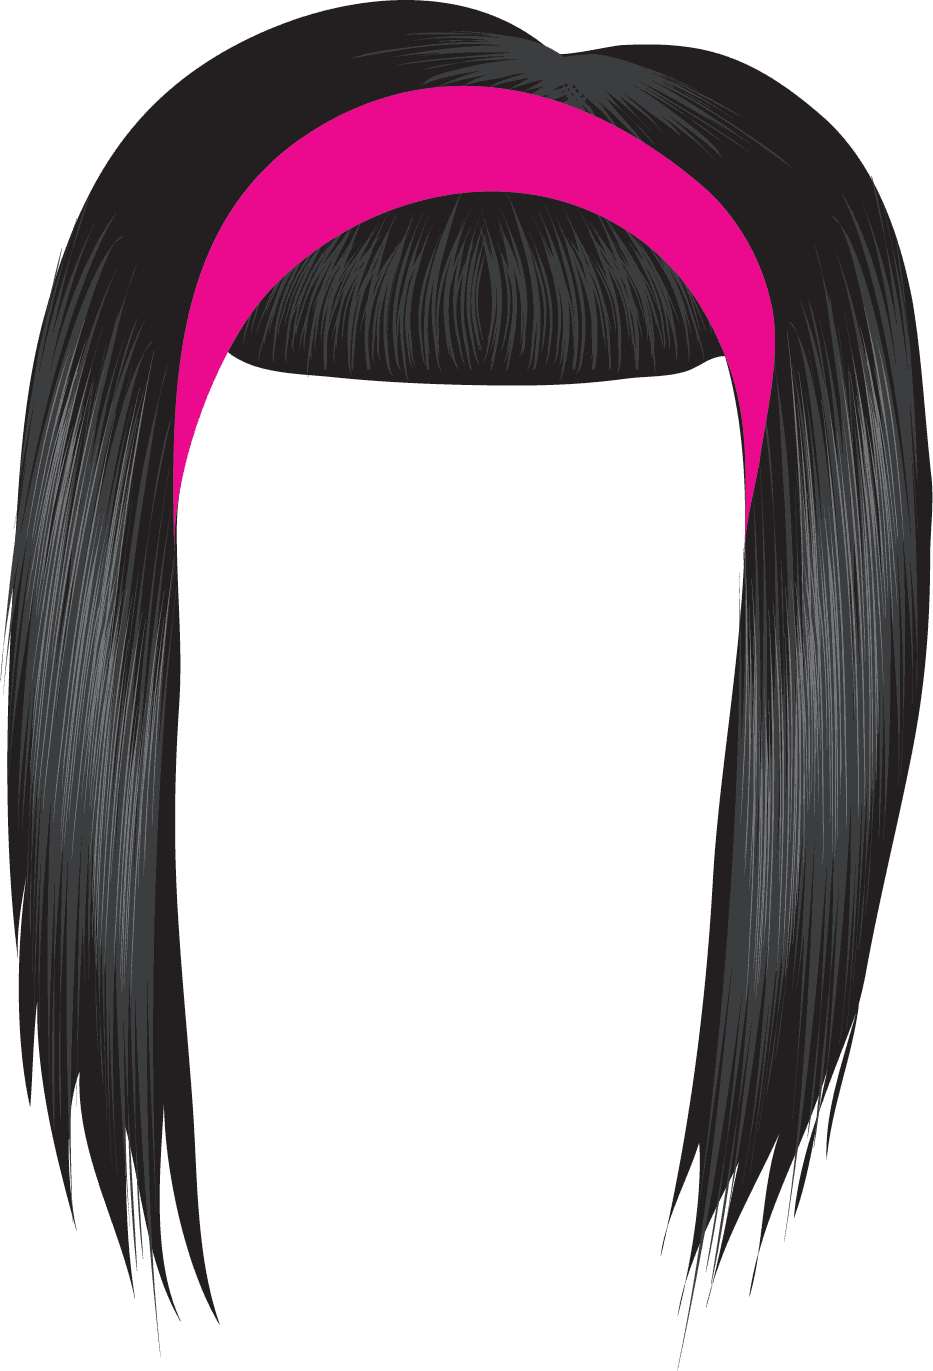 hair clipart png - photo #41